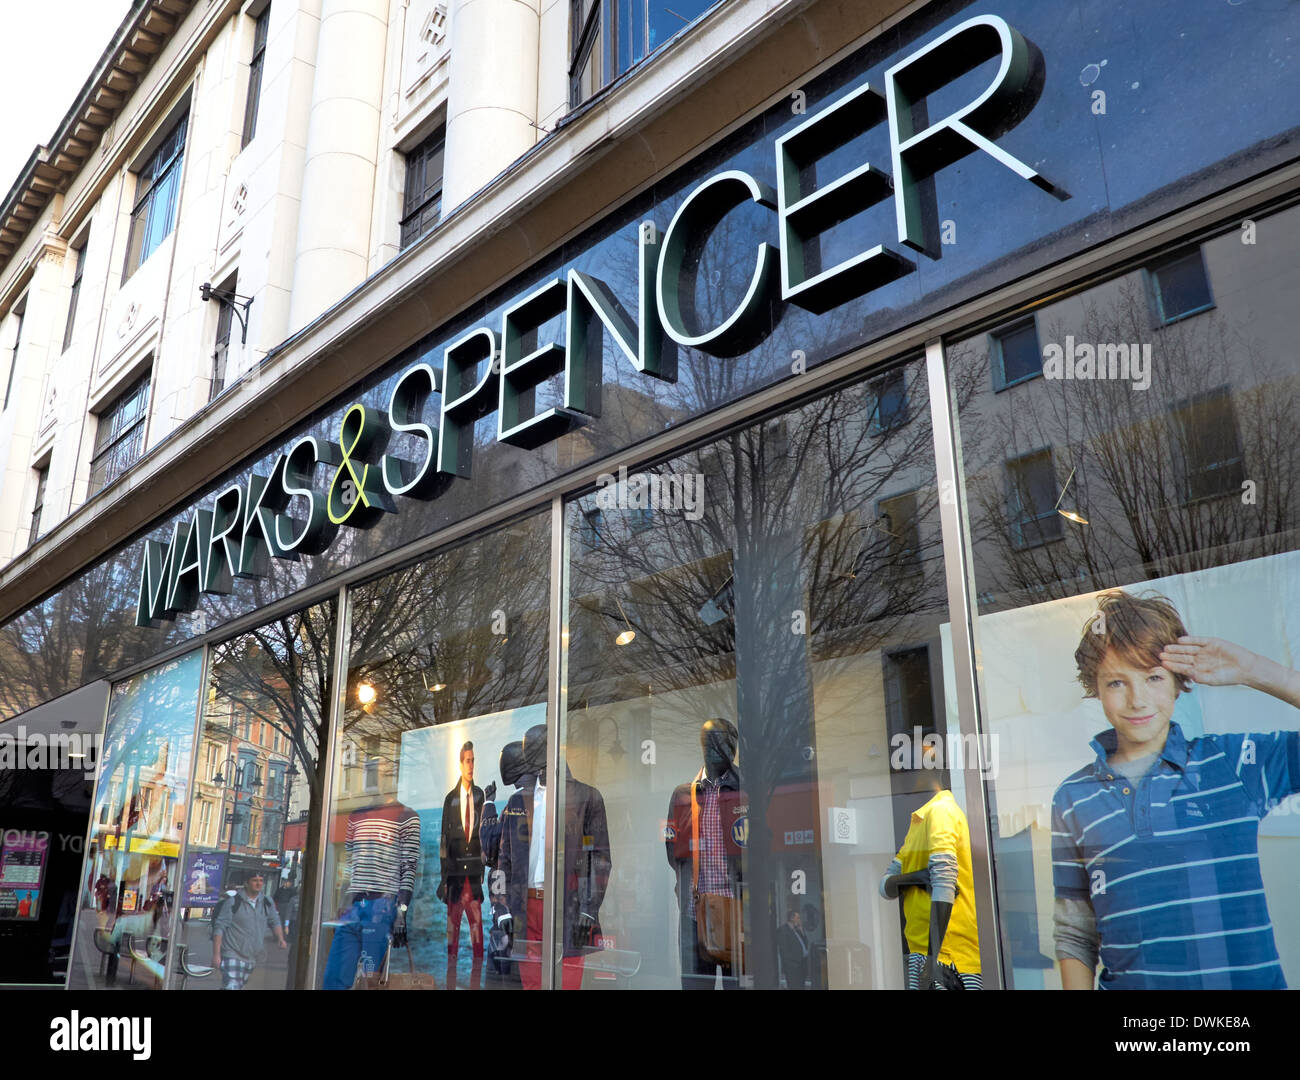 Marks and Spencer high street retailer shop front window display Stock Photo